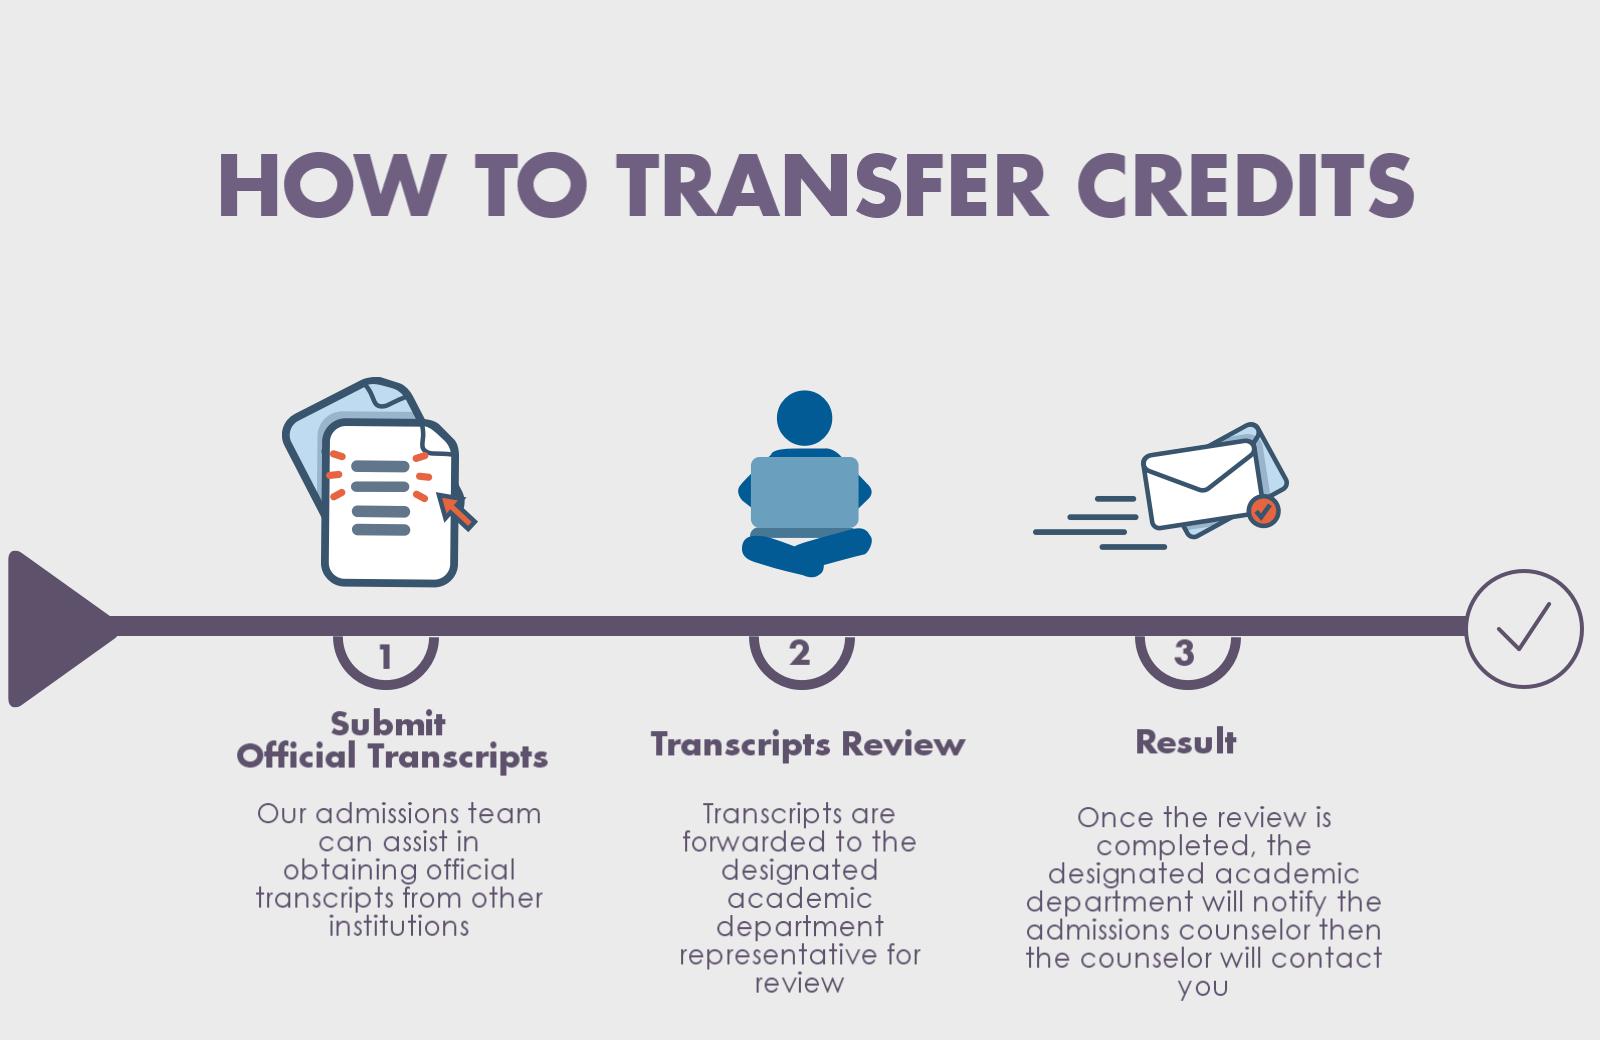 Common challenges in transferring credits